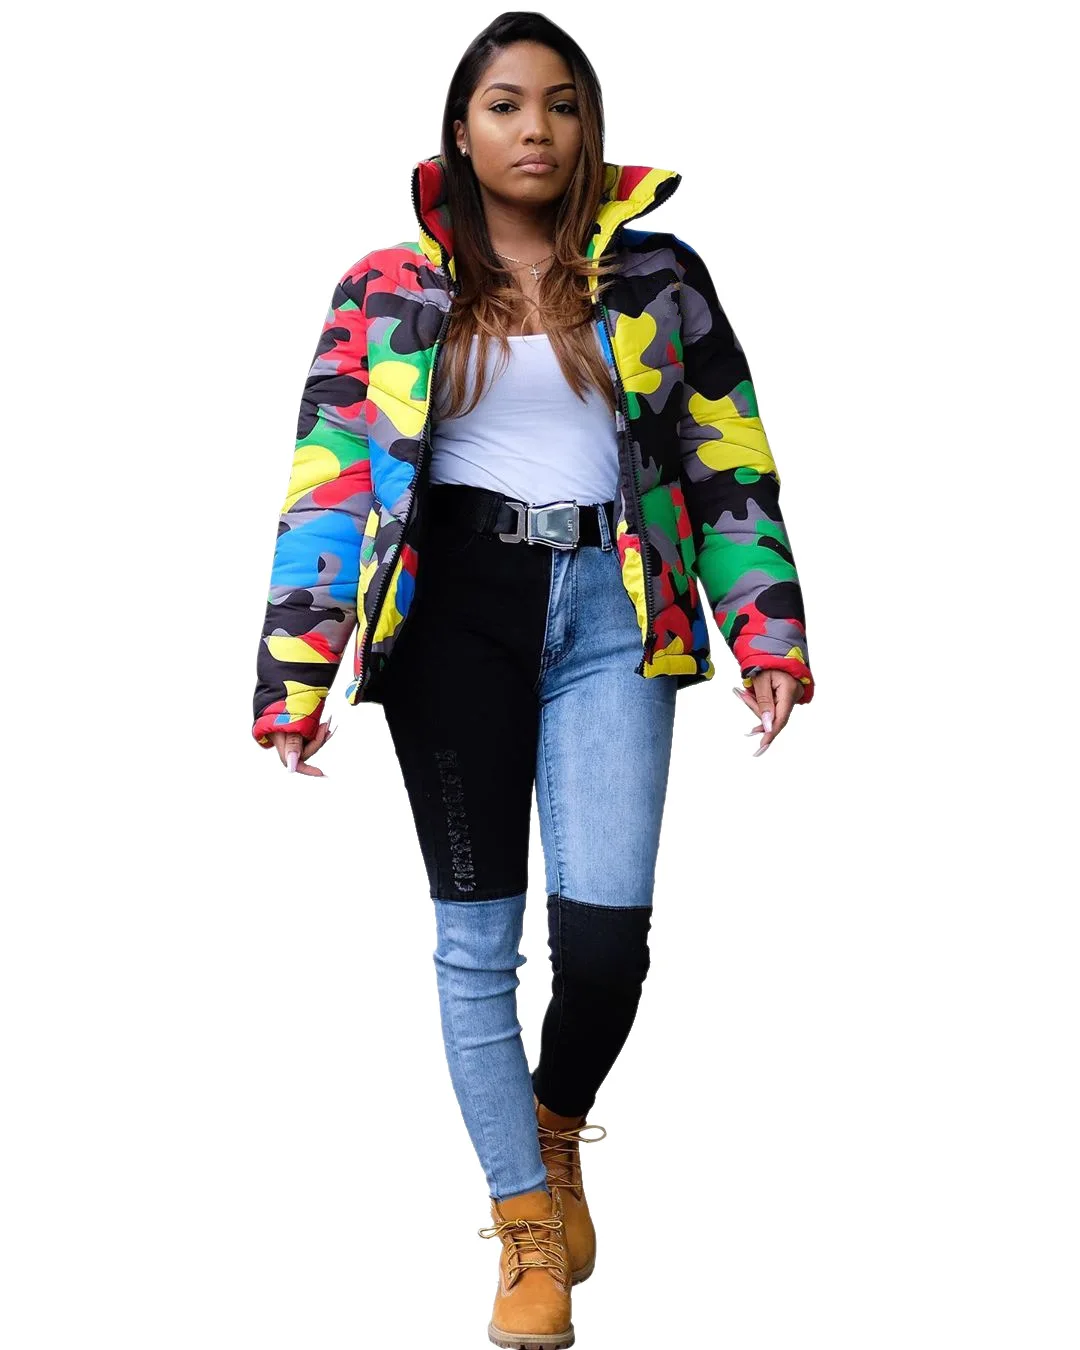 JCamouflage Printing Dyeing Jacket Woman Winter 2023 Demi-season Parka Female Spring New In Outerwear Vest Quilted Coat Oversize enlarge